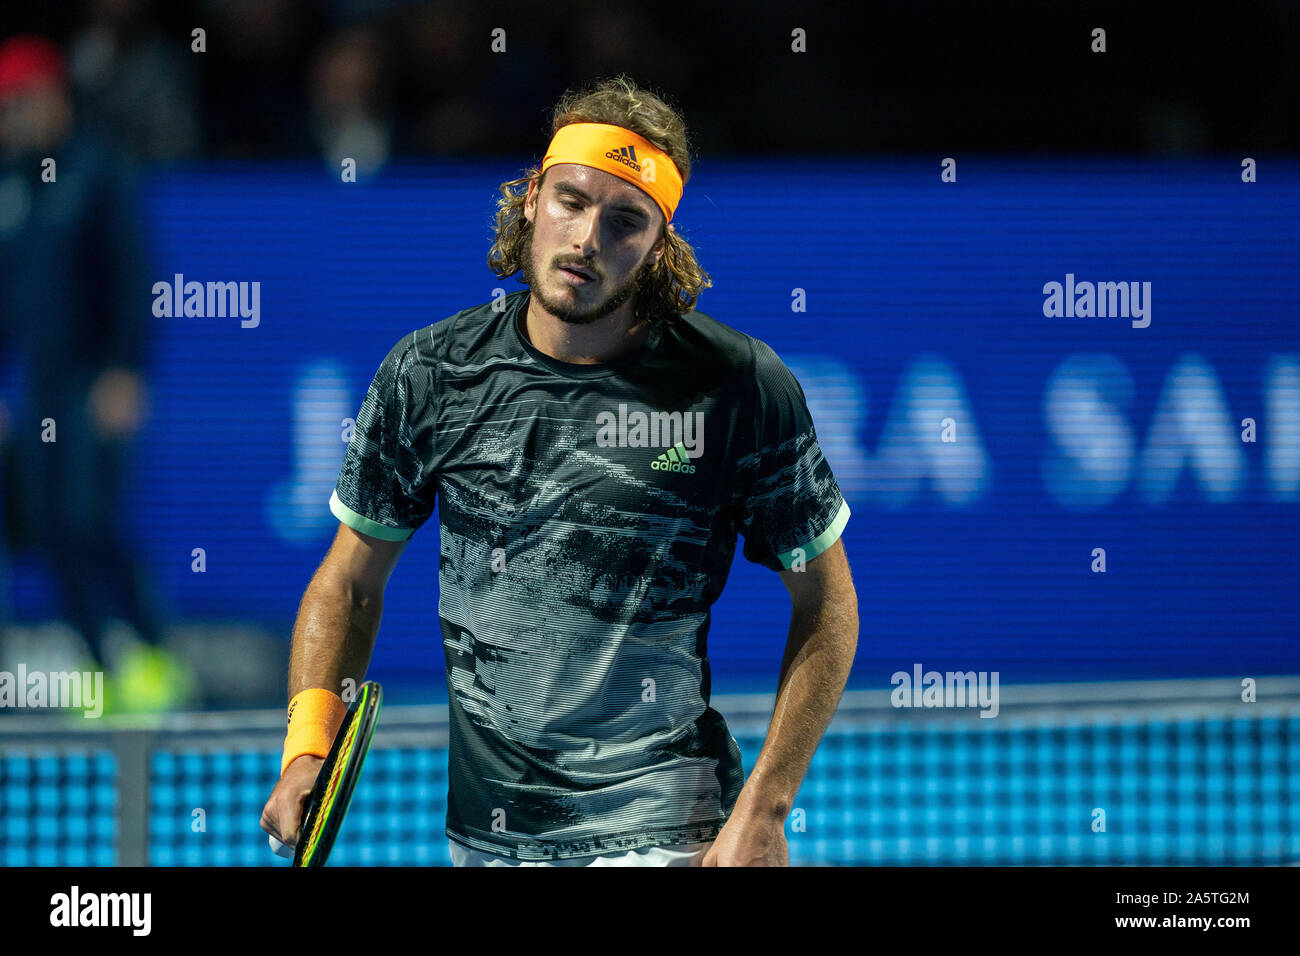 BASEL, SWITZERALND - OCTOBER 22: Stefanos Tsitsipas (Greece) frustrated  after a lost point during the ATP 500 Swiss Indoors 2019 Tennis match  between Stefanos Tsitsipas and Albert Ramos-Vinolas at St. Jakobshalle Basel